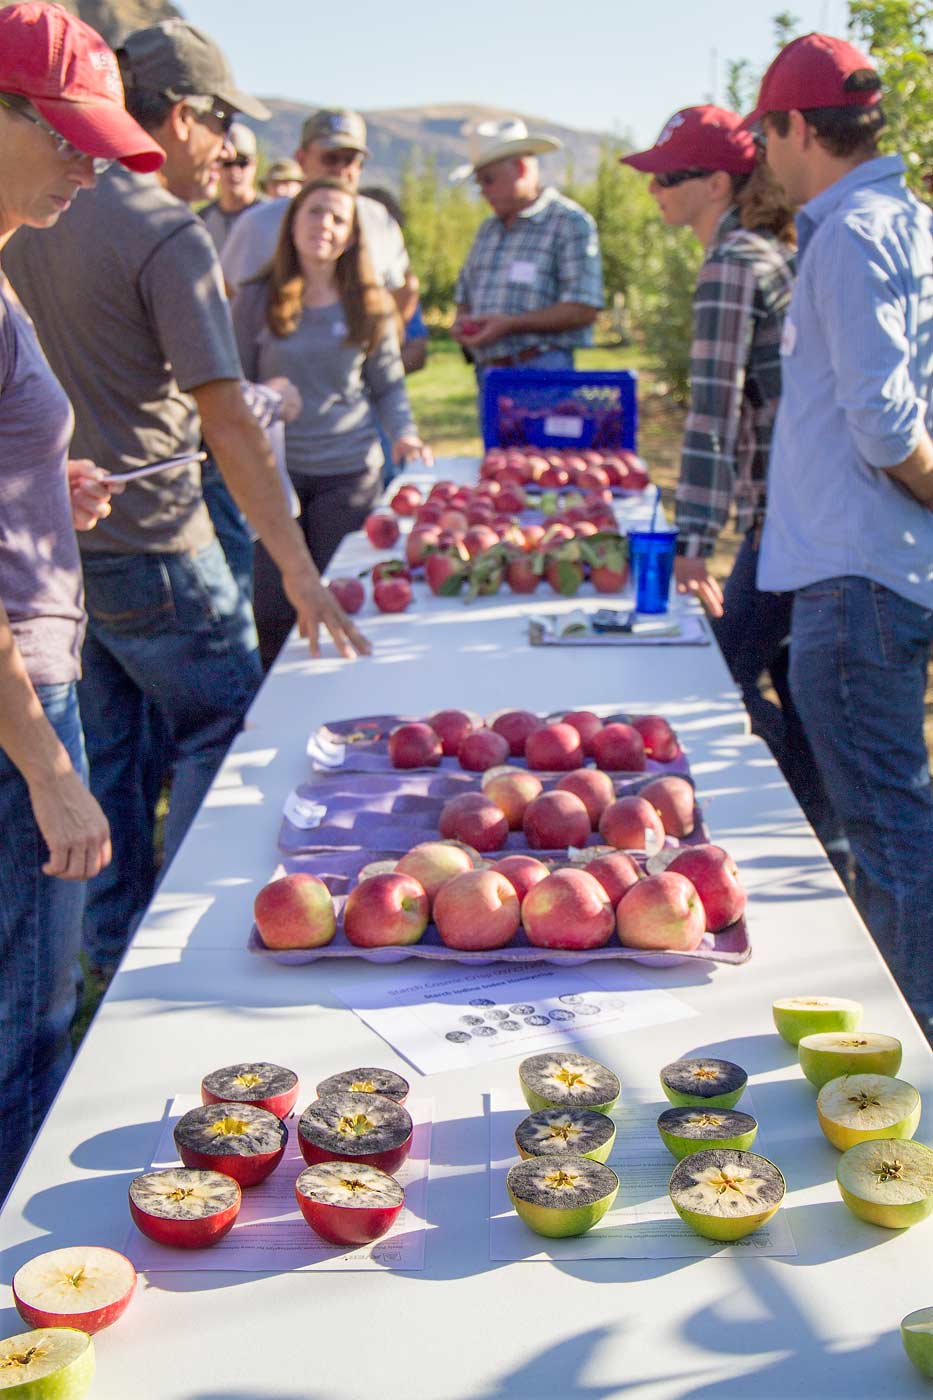 Researchers from Washington State University and the Washington Tree Fruit Research Commission share the latest findings into growing the new WSU apple variety, WA 38, also known as Cosmic Crisp, at a field day at WSU’s Sunrise Orchard in Rock Island, Washington, in September. <b>(Shannon Dininny/Good Fruit Grower)</b>